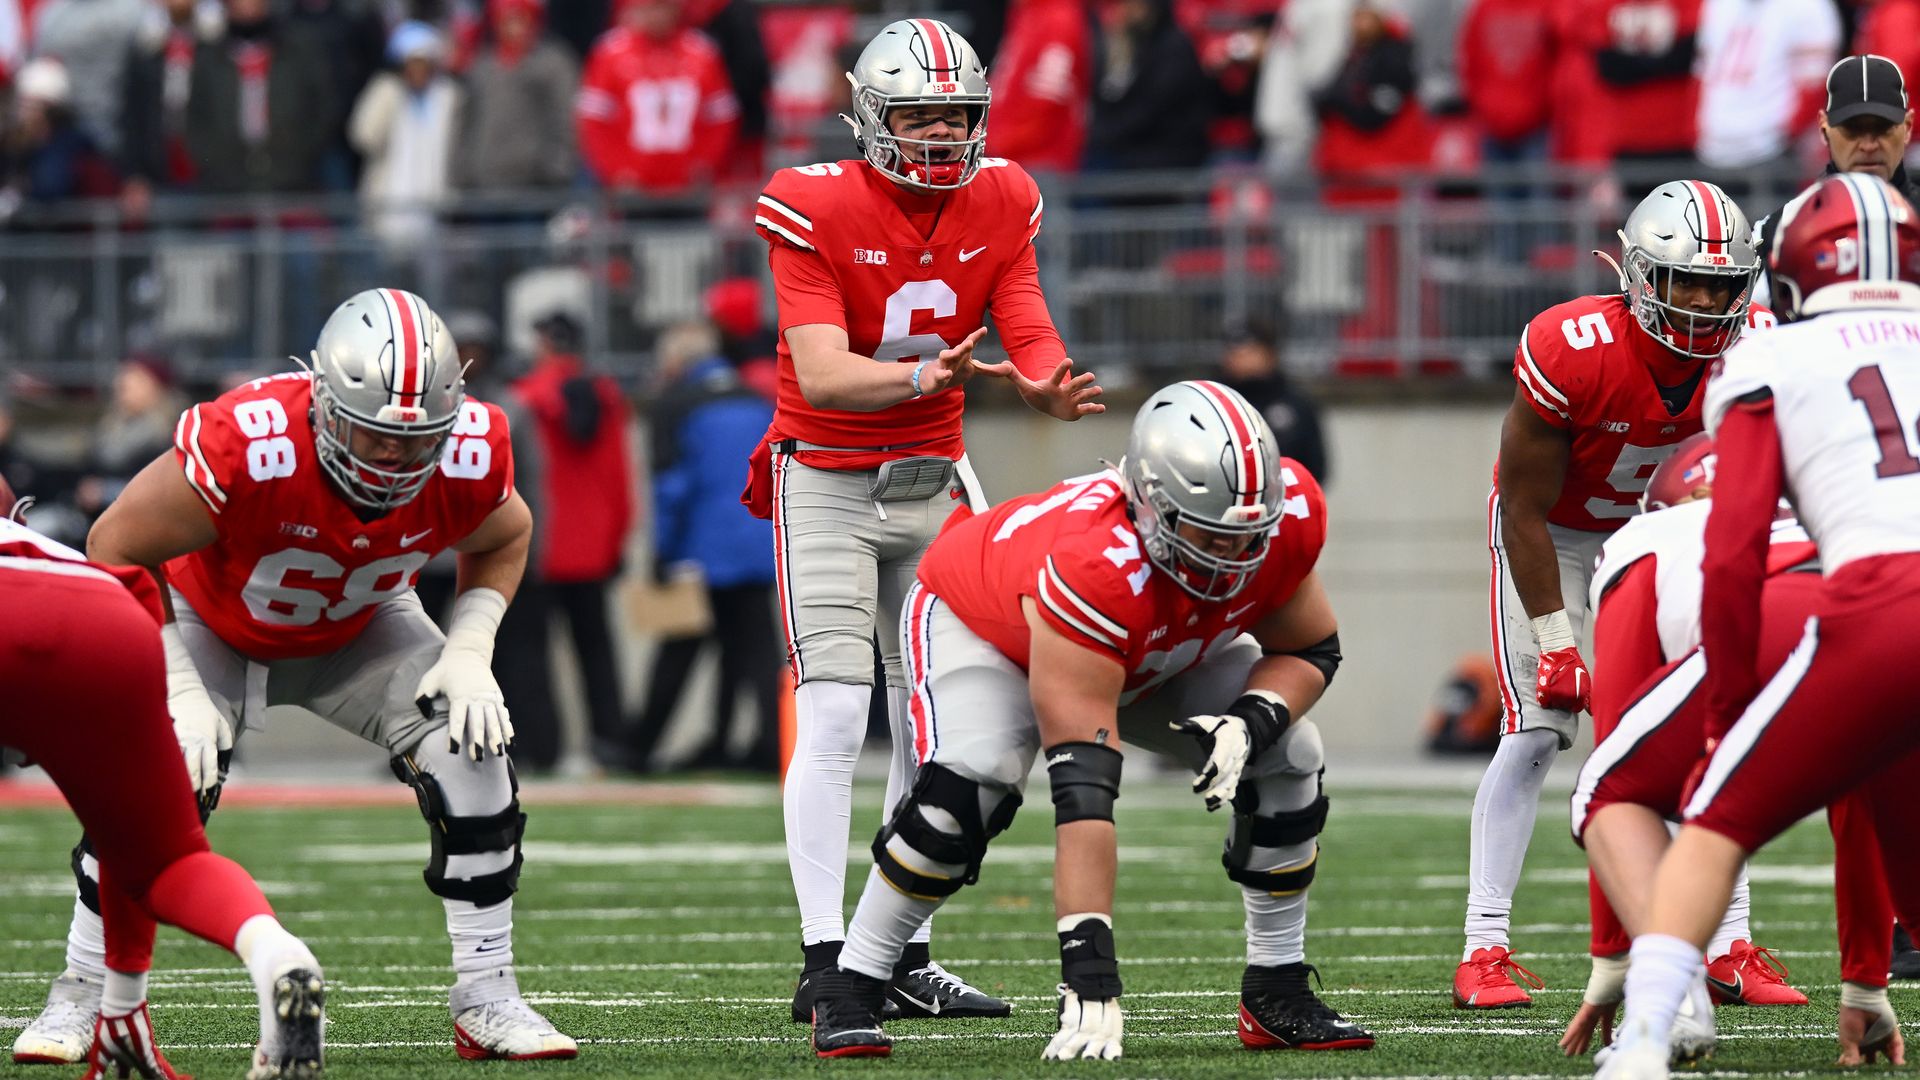 Buckeyes quarterback Kyle McCord (No. 6) calls a play during a game against the Indiana Hoosiers